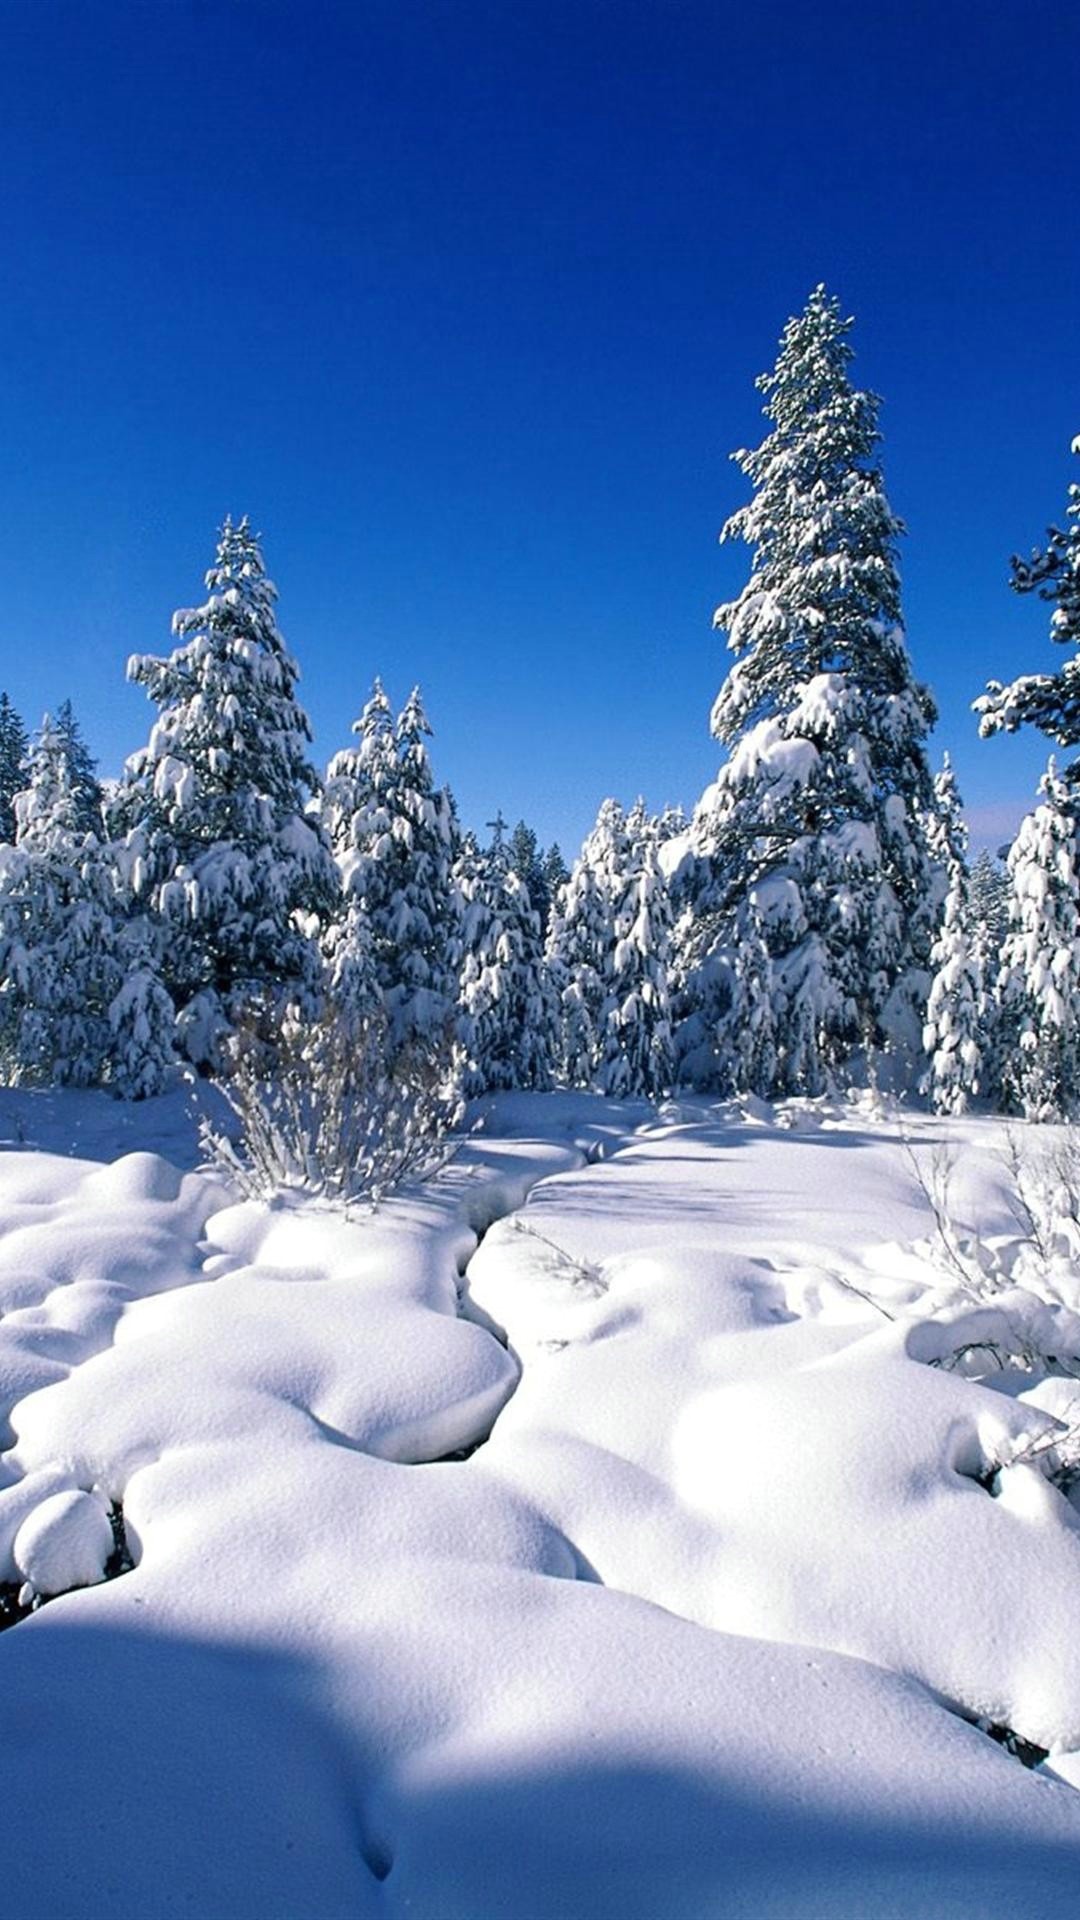 winter themed wallpaper,snow,winter,tree,nature,natural landscape